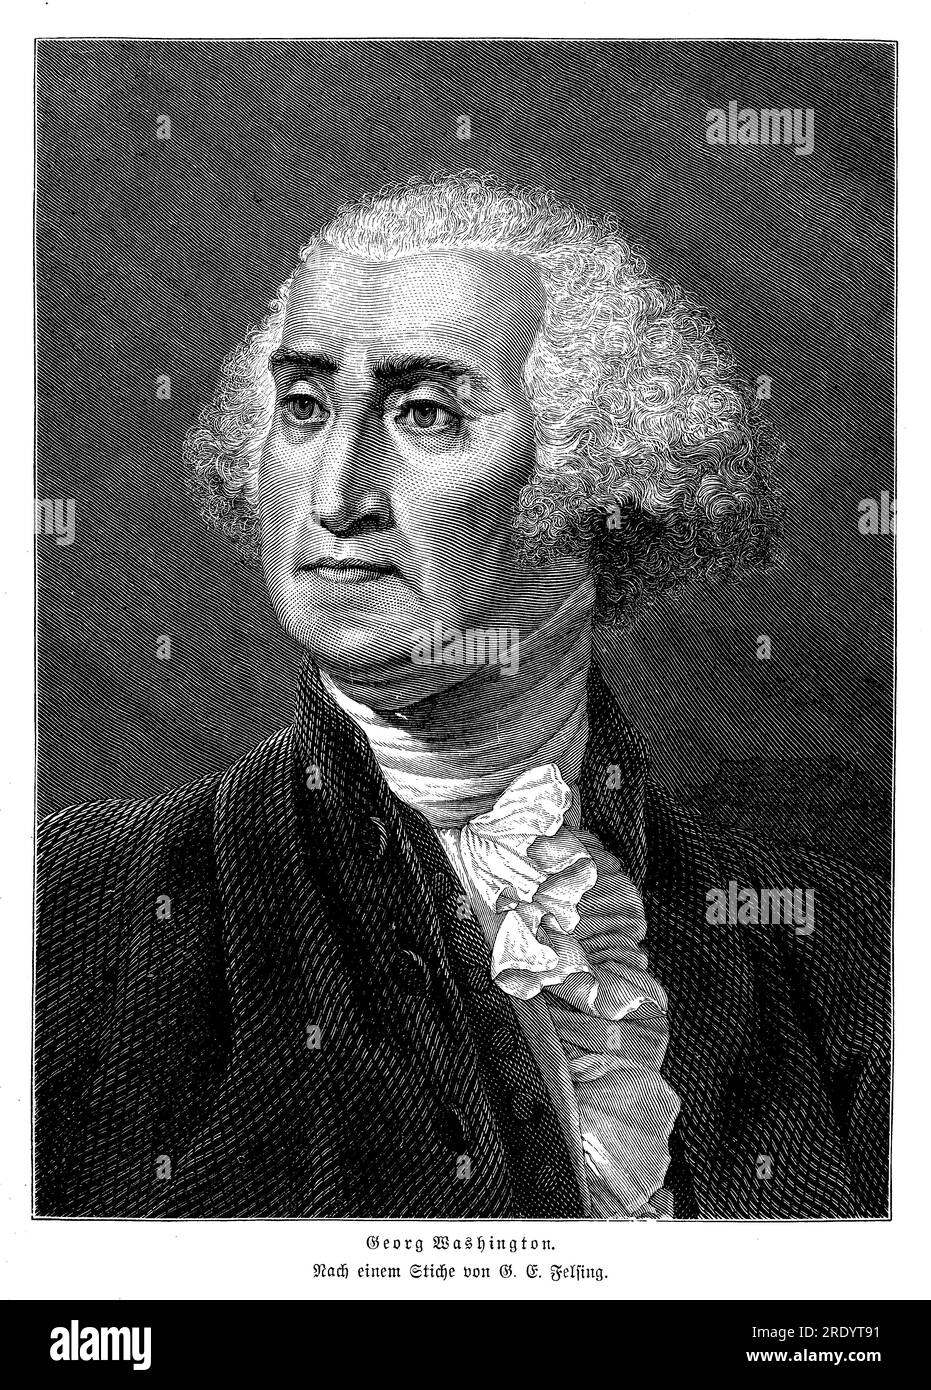 George Washington (1732-1799) was an American military leader, statesman, and the first President of the United States (1789-1797). He played a pivotal role in the American Revolutionary War, commanding the Continental Army and leading the colonies to victory against the British forces. Stock Photo